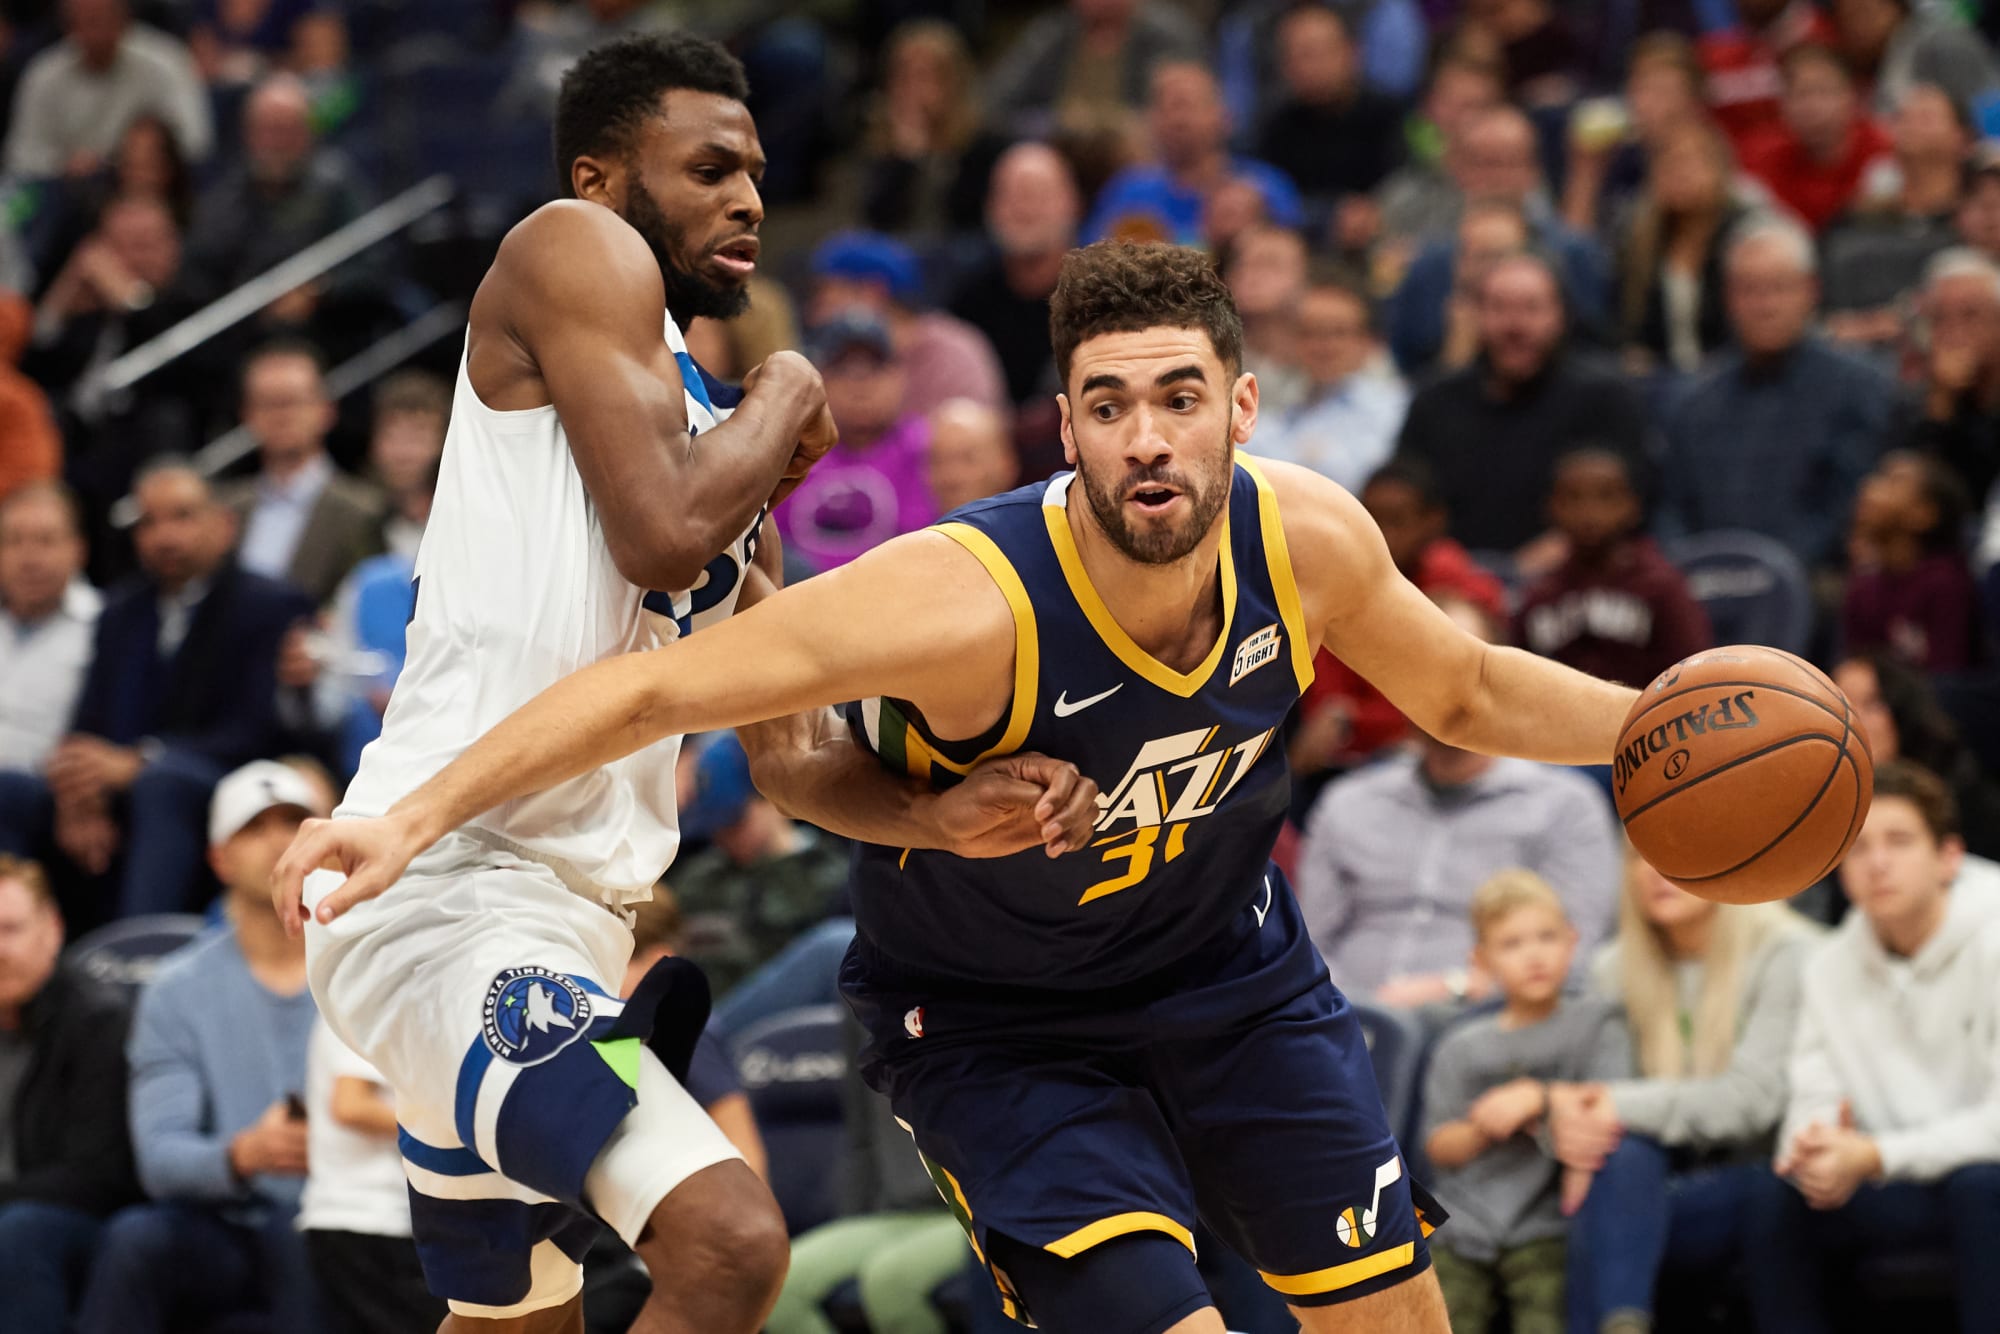 LookItUp - Georges Niang, What do people want to know about Georges Niang?  👀 #LookItUp, By Utah Jazz